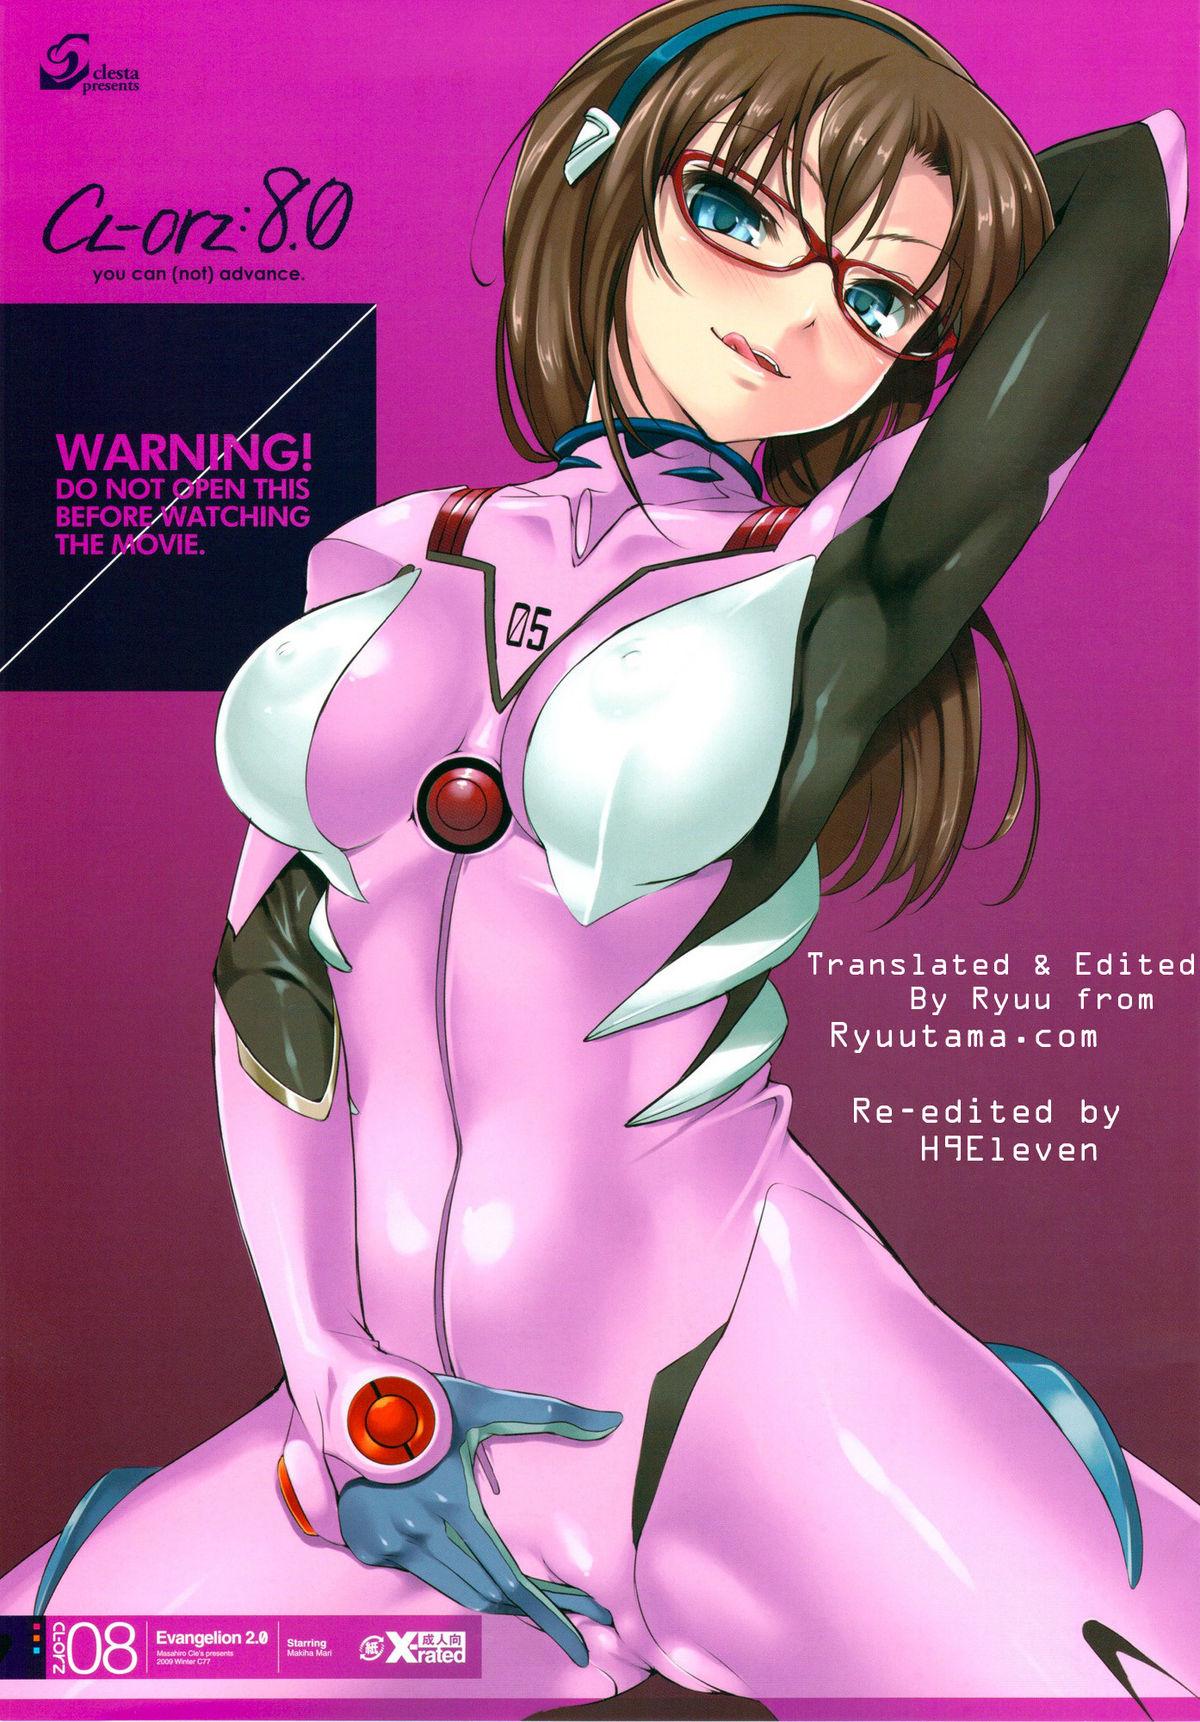 (C77) [Clesta (Cle Masahiro)] CL-orz 8.0 you can (not) advance. (Rebuild of Evangelion) [English] [Decensored] 0